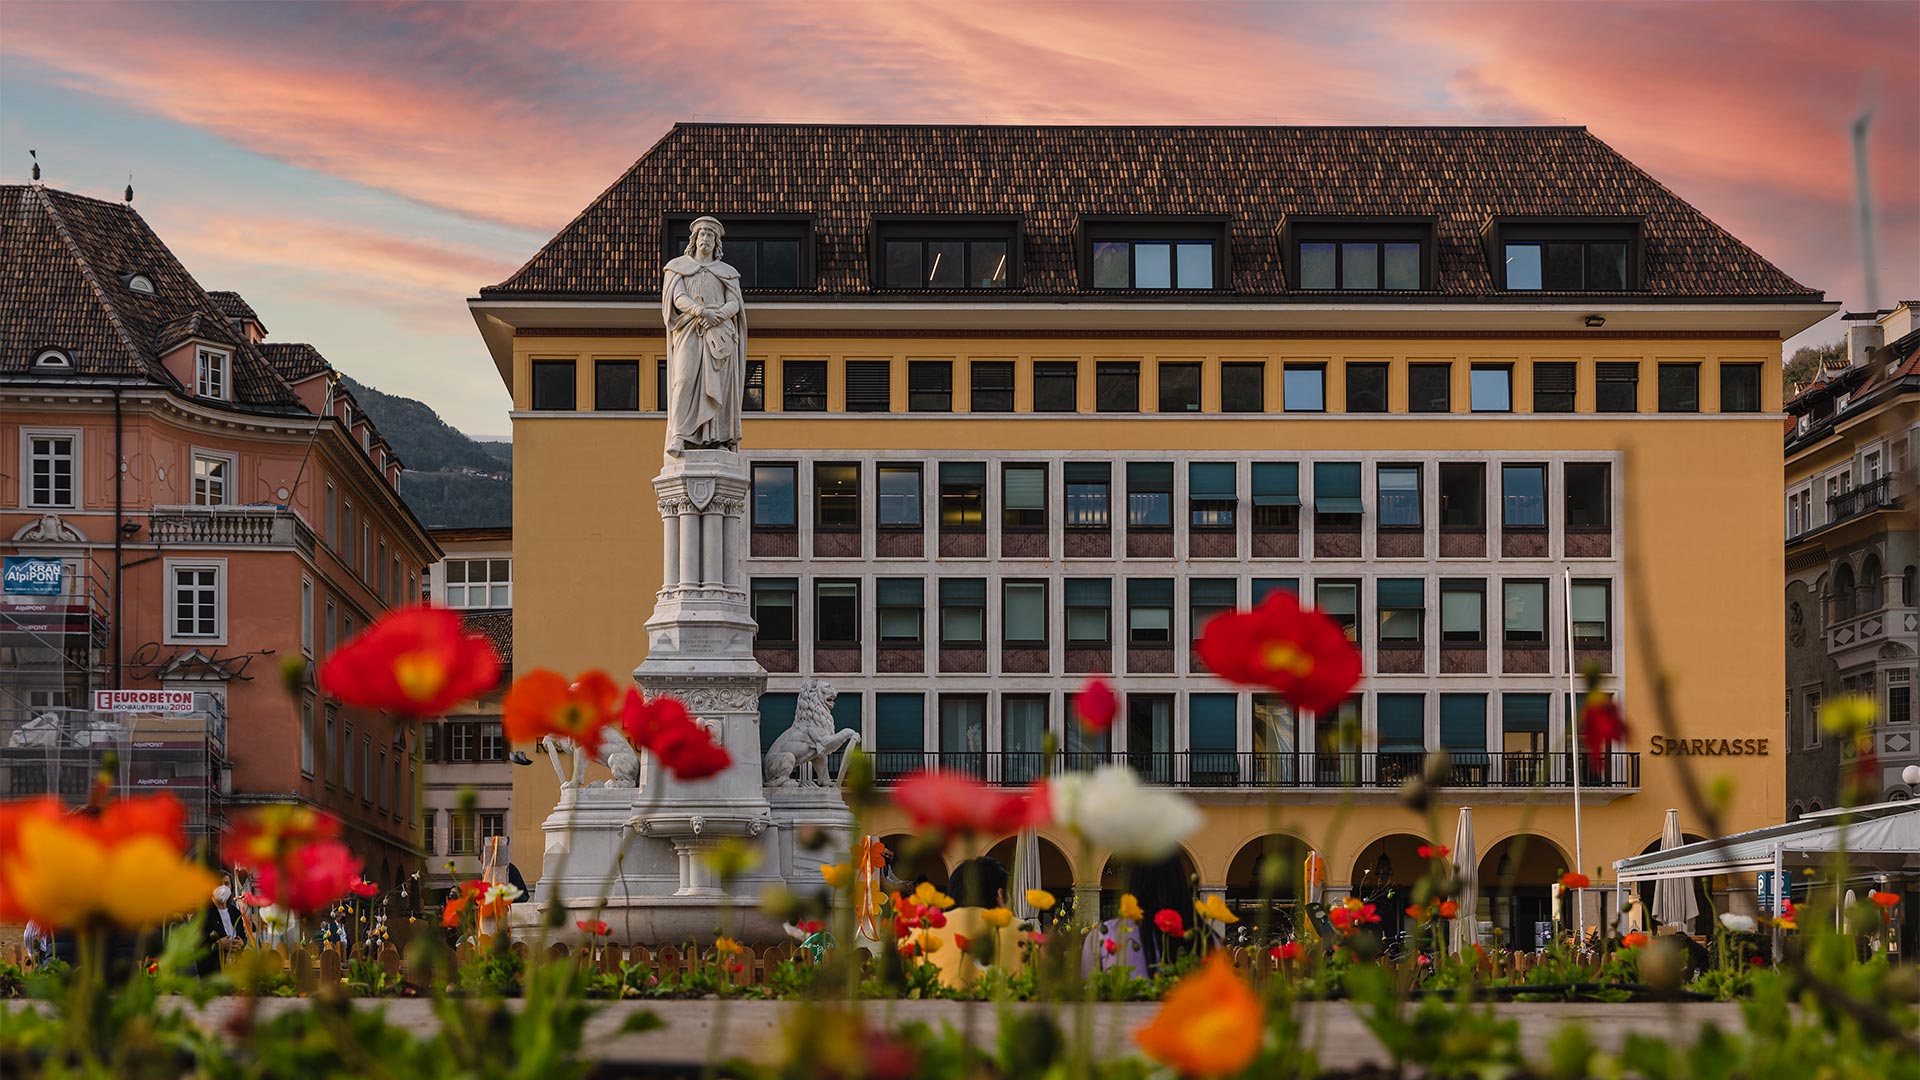 Front view of Piazza Walther with the statue in the foreground in front of the historic buildings in a spring sunset.